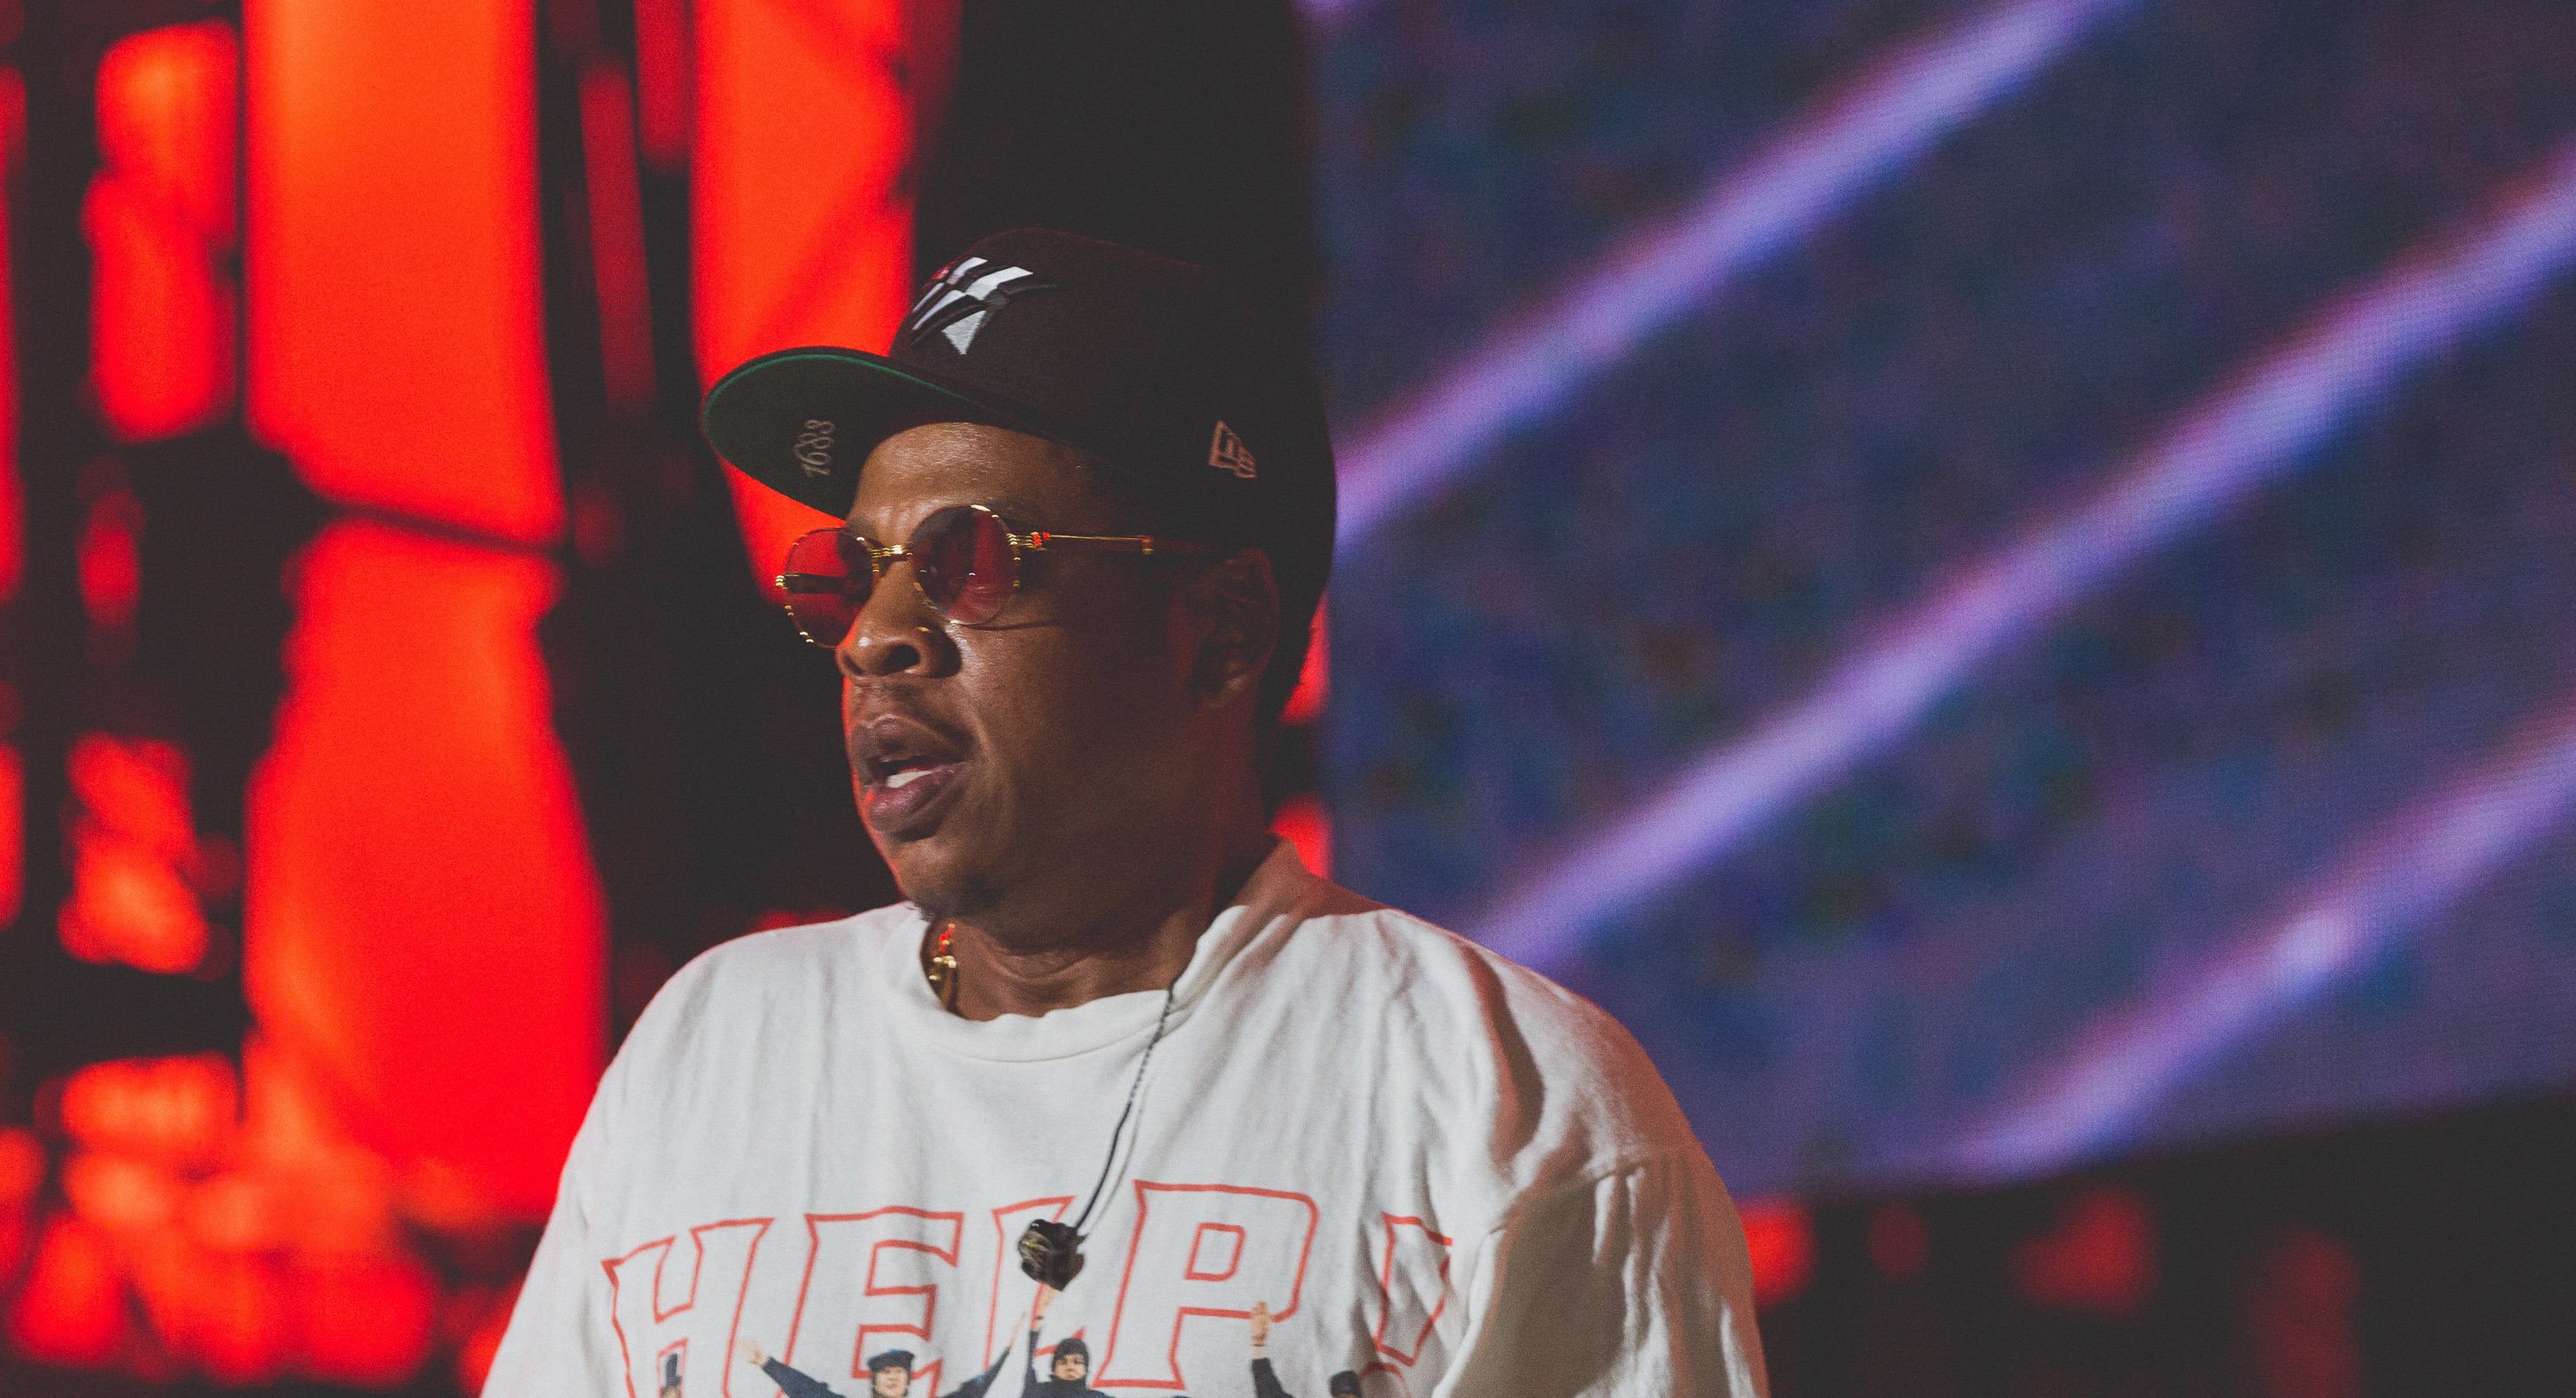 JAY-Z & Team Roc Posts Bail & Pays Court Fees For Alvin Cole Protestors